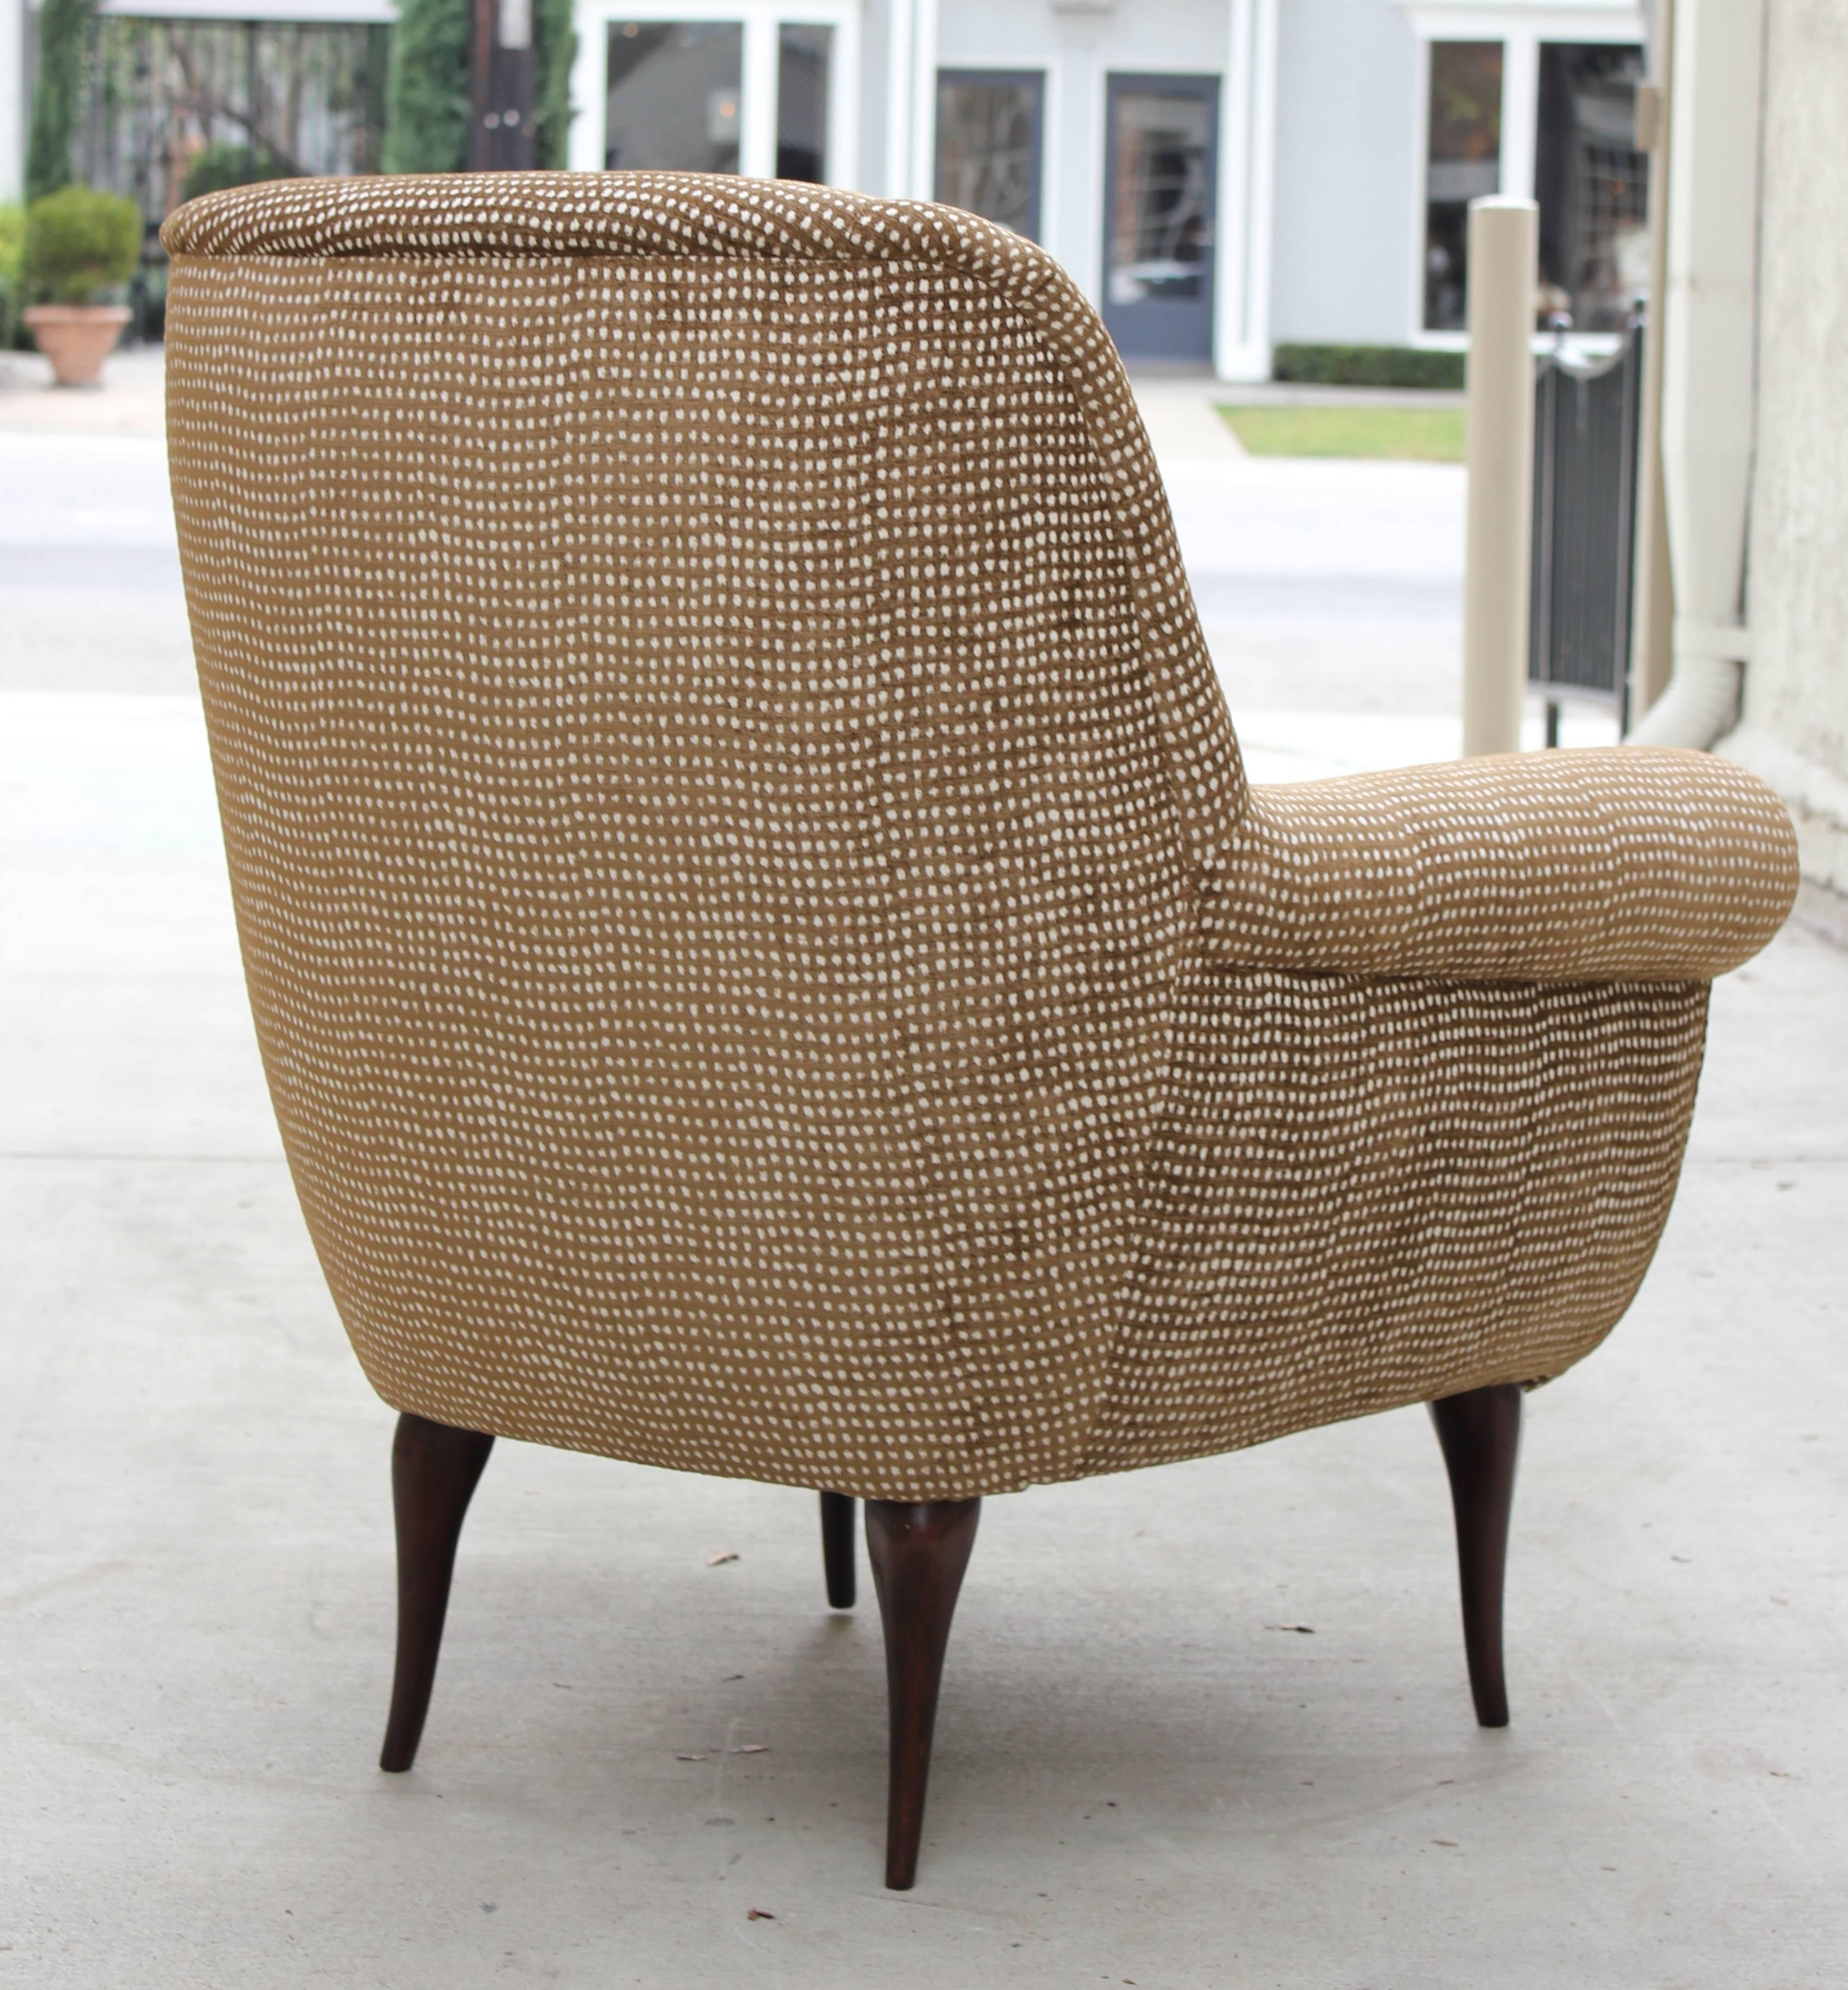 1950s Italian Club Chair with new finish and Chenille Upholstery.   Great Legs and Curved Back.  